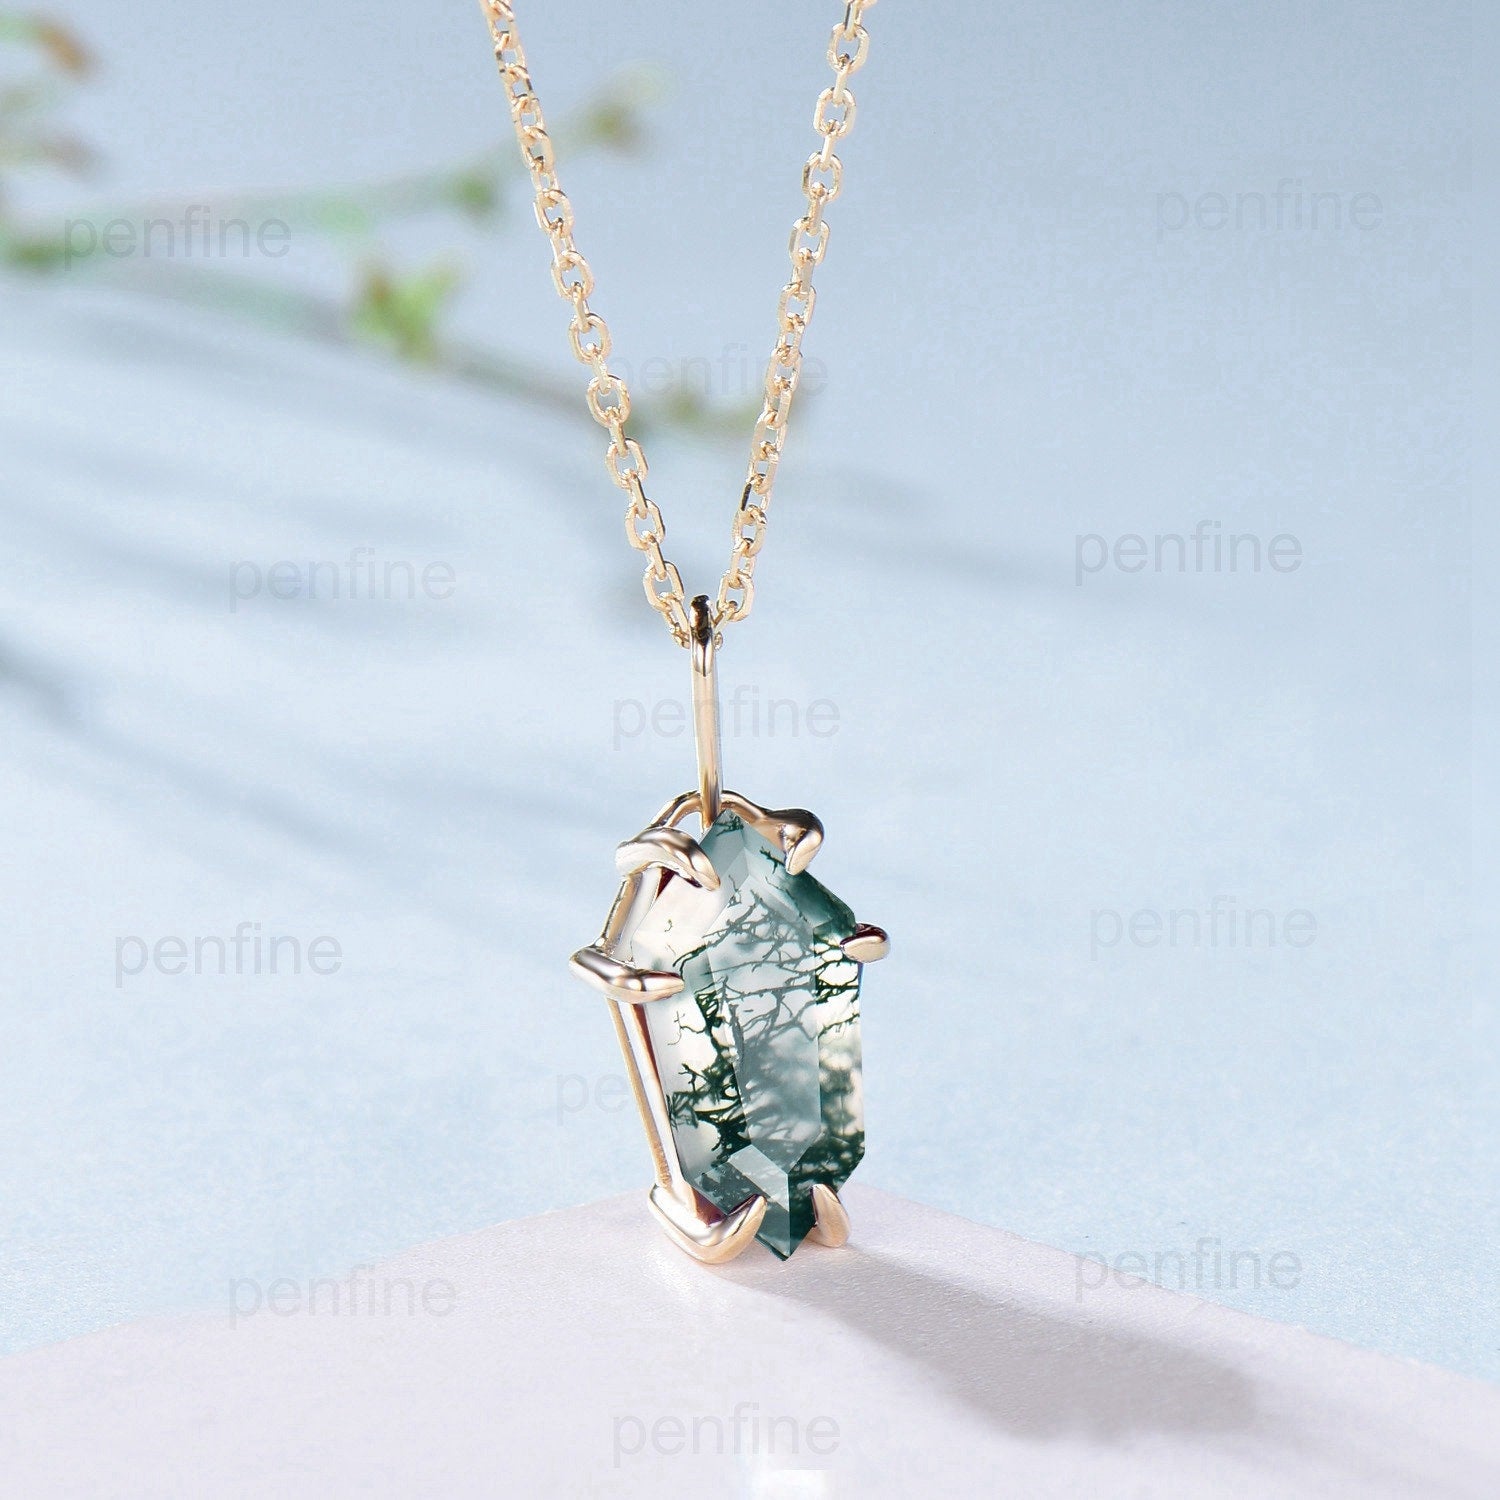 Dainty Shield cut moss agate necklace solid 14k 18k rose gold vintage Personalized minimalist green agate pendant anniversary gift for women - PENFINE